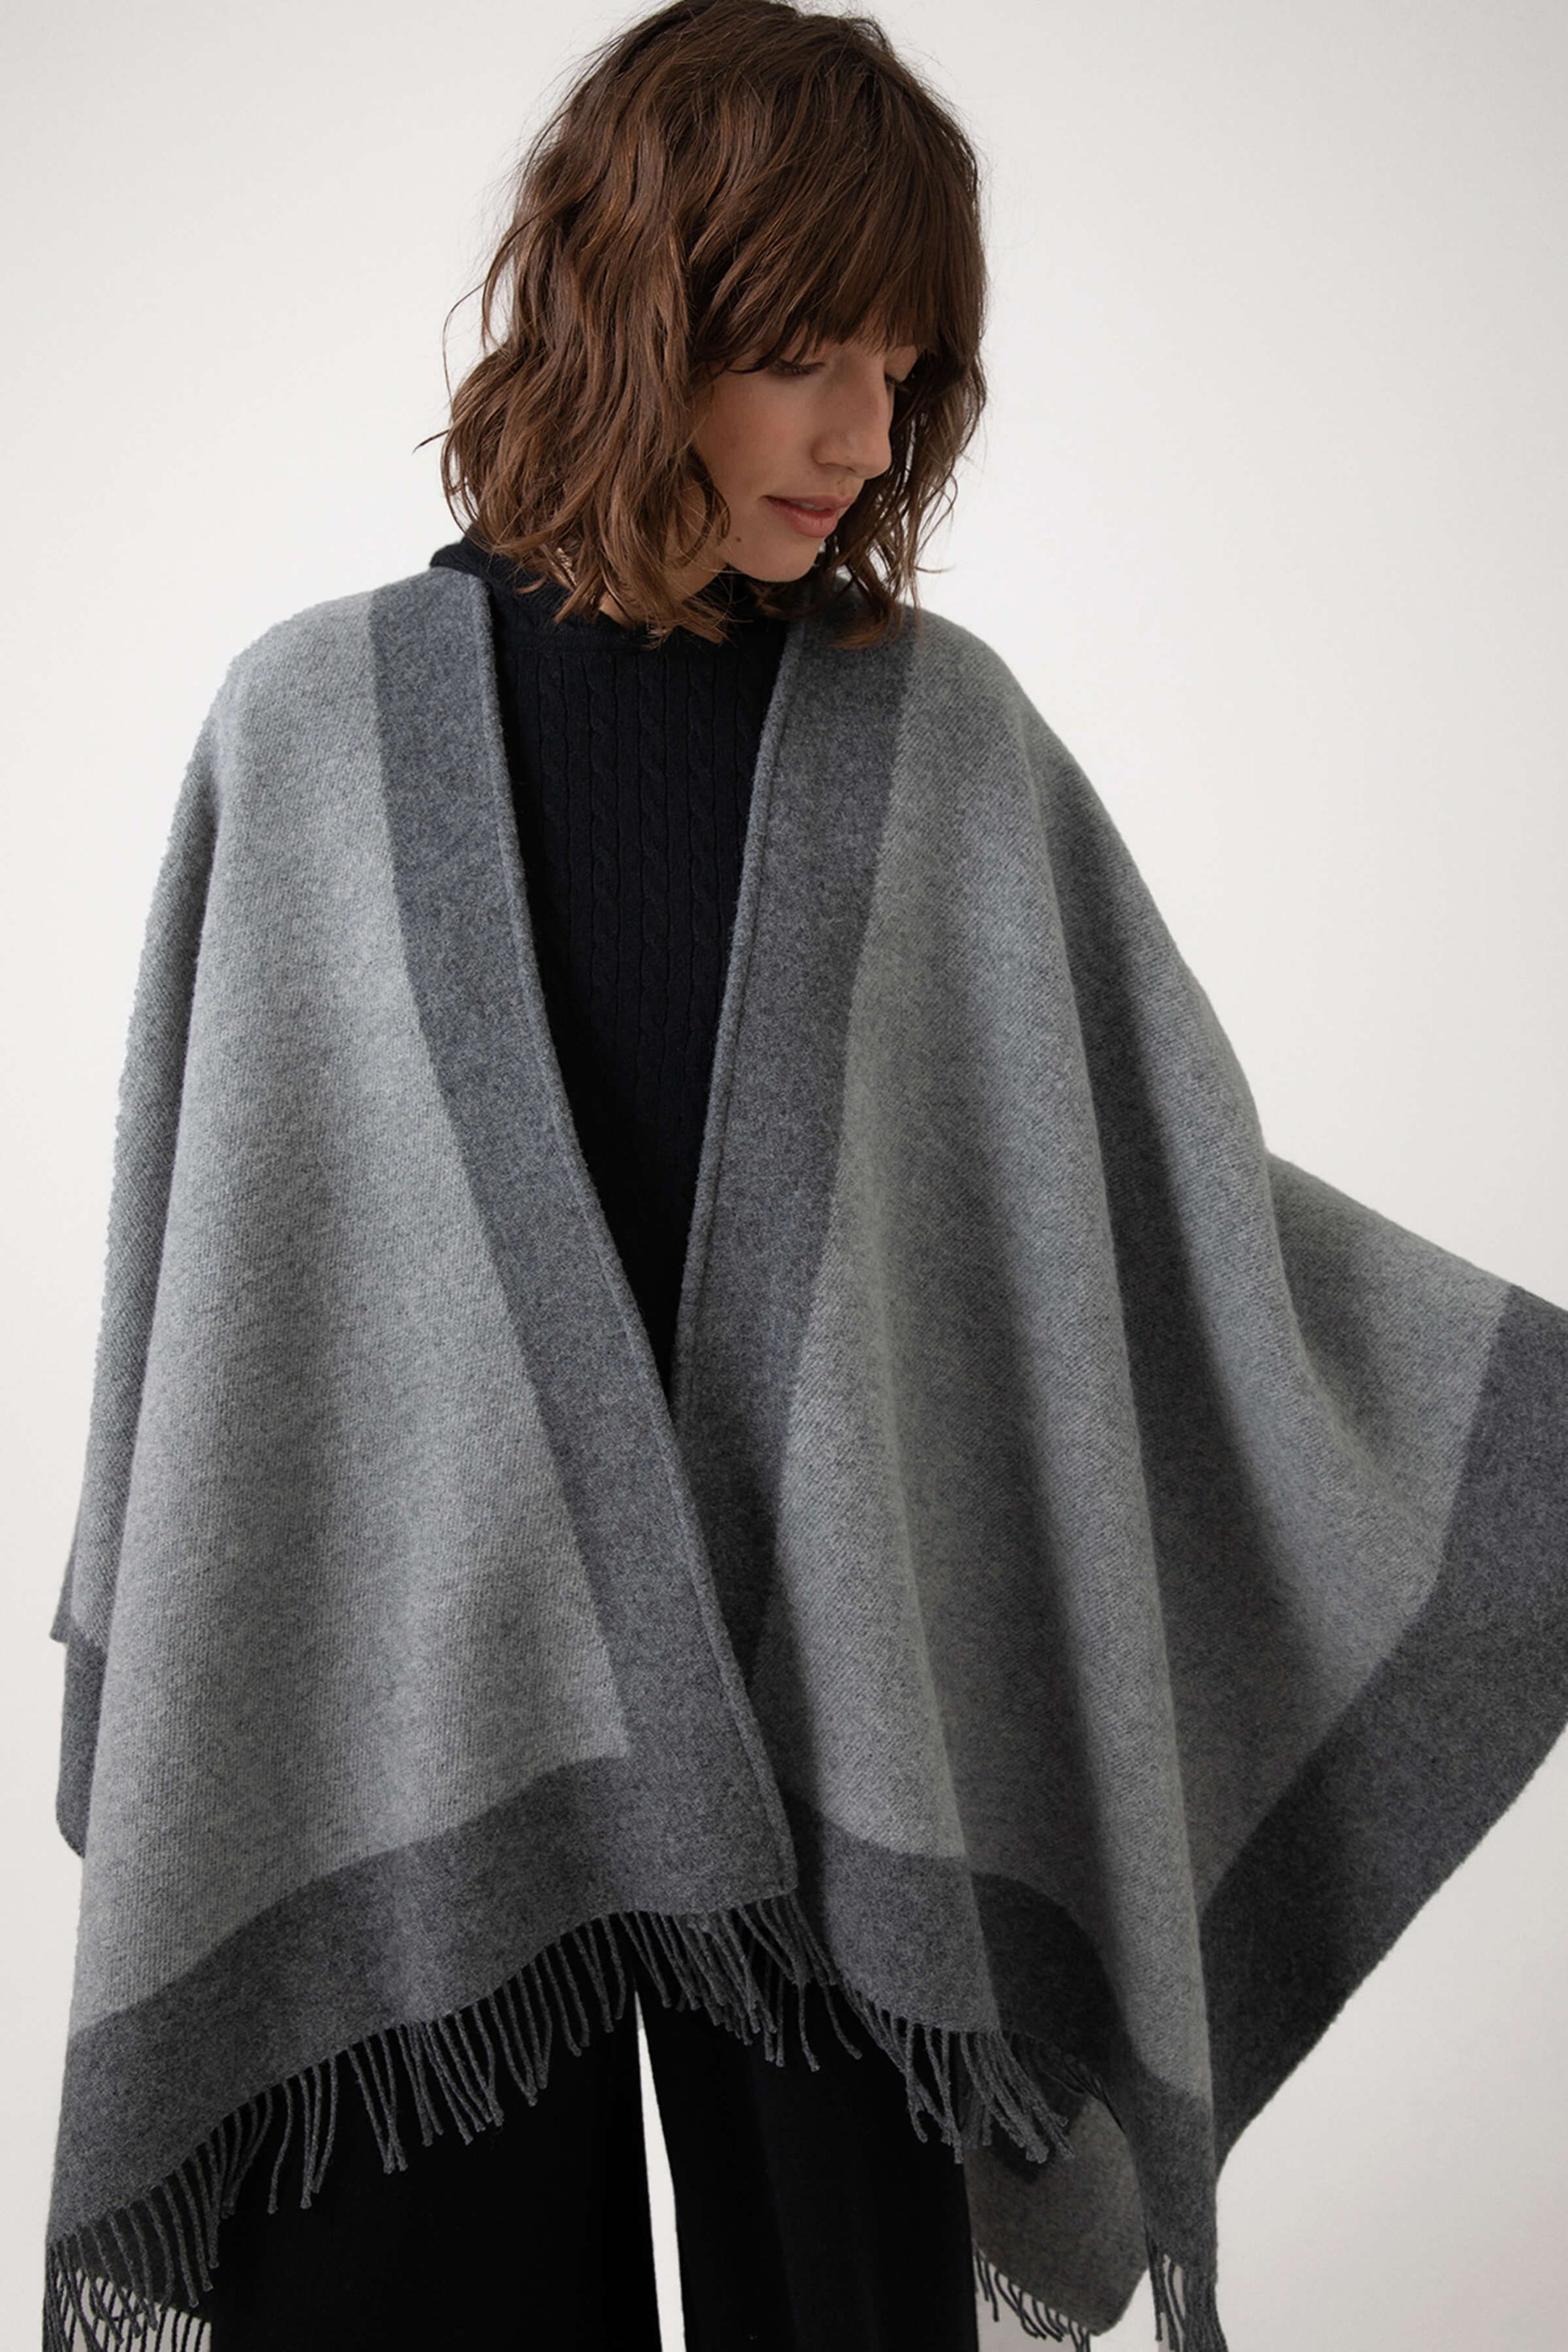 Model wearing Johnstons of Elgin Merino Wool Cape with Contrast Border in Grey worn over Navy hoodie & Joggers on a grey background TD000230RU7369ONE